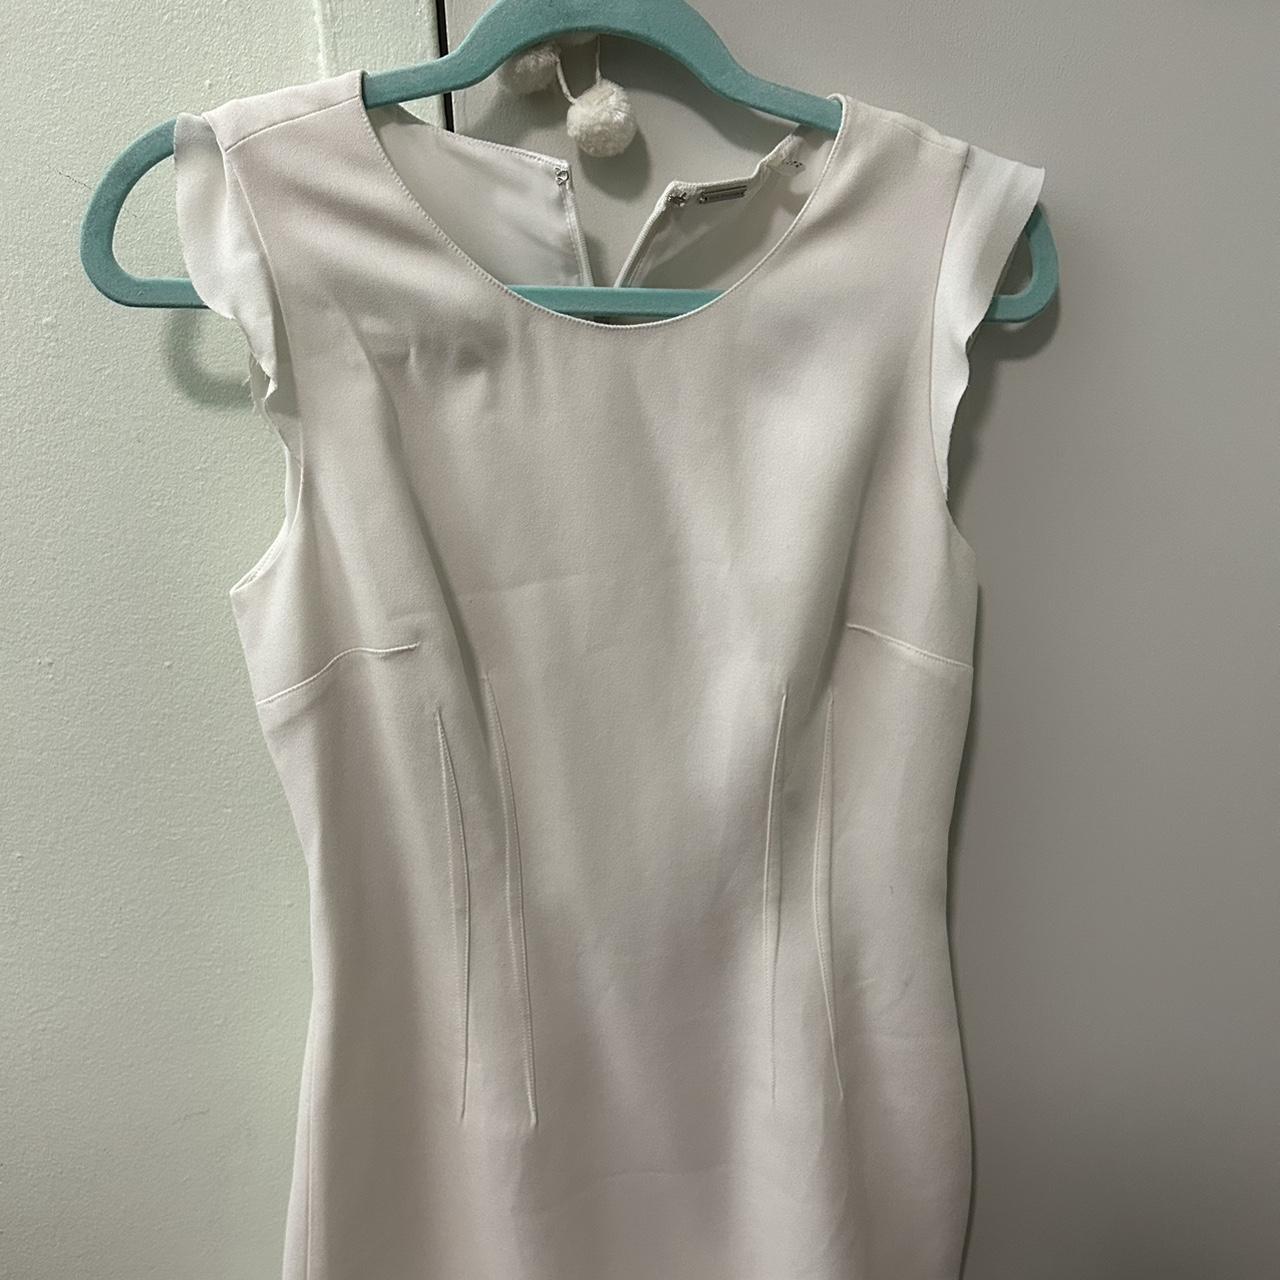 Elie Tahari White Dress perfect for work, or for... - Depop